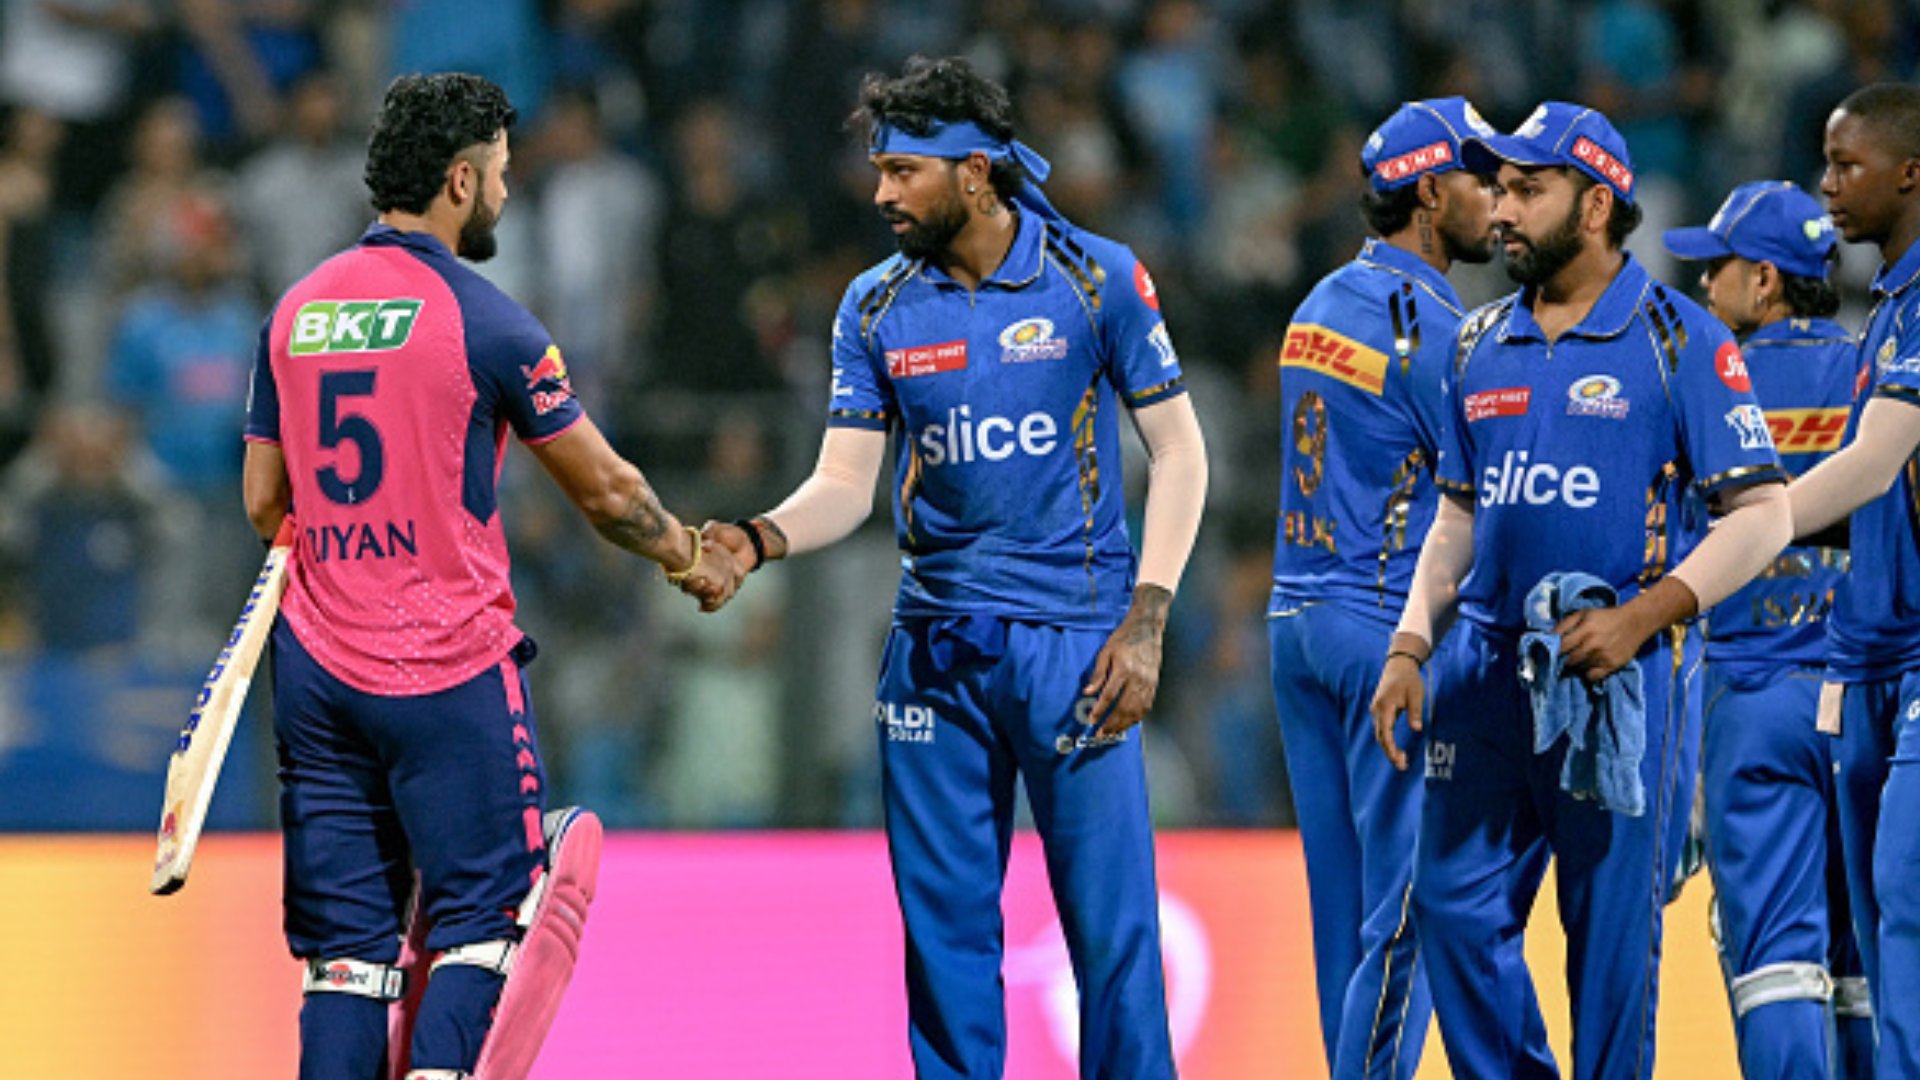 Rajasthan Royals top the table with a 6-wky win over MI